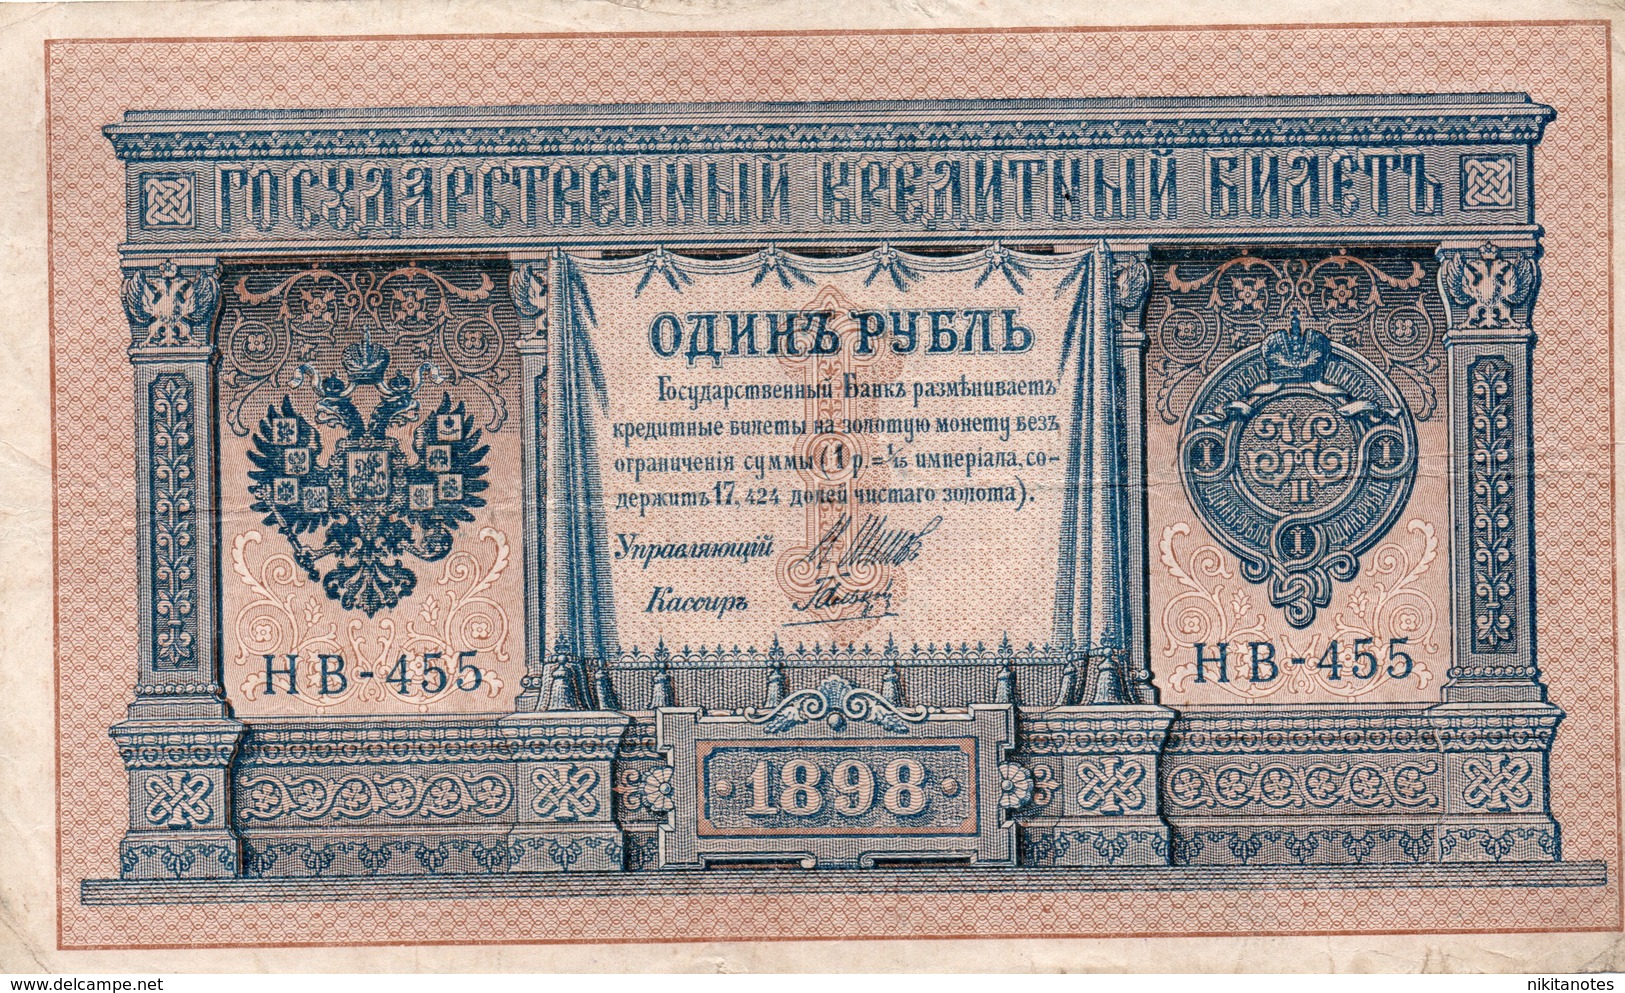 RUSSIA 1 Ruble 1898 SEE SCAN, F VF - Russie